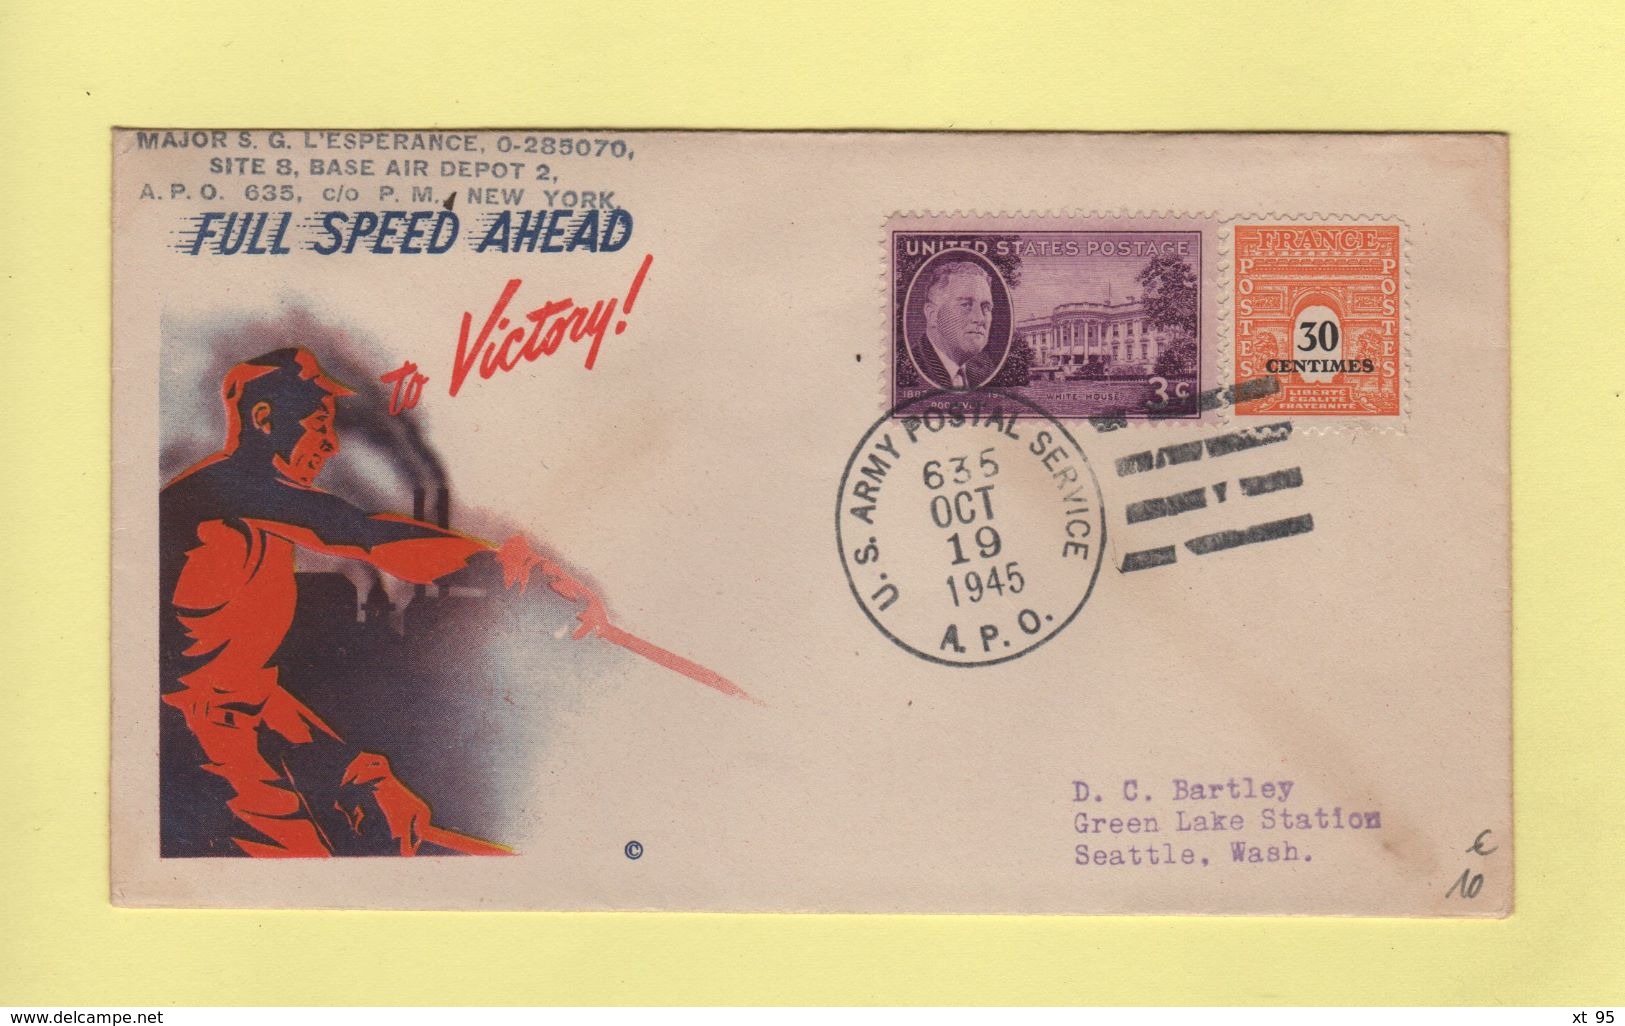 APO 635 - US Postal Army Service - 19 Oct 1945 - Mixte US France - Full Speed Ahead For Victory - 2. Weltkrieg 1939-1945